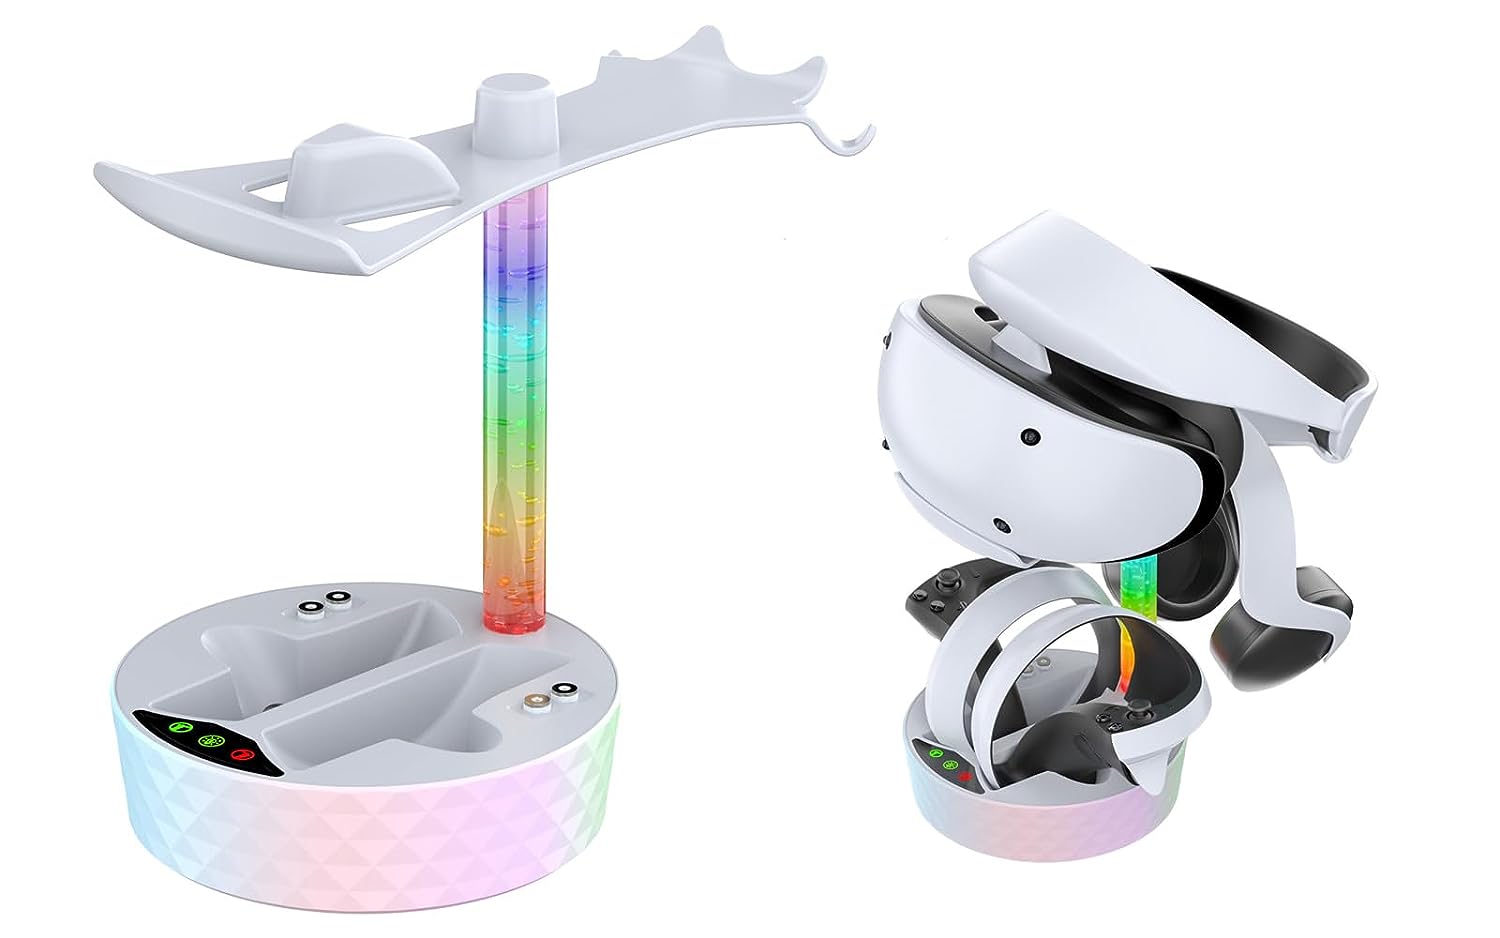 New World PSVR2 Controller Charger, PS VR2 Charging Stand Dock PSVR2 Charging Station with VR Headset Holder Display Stand with RGB LED Light for PS VR2